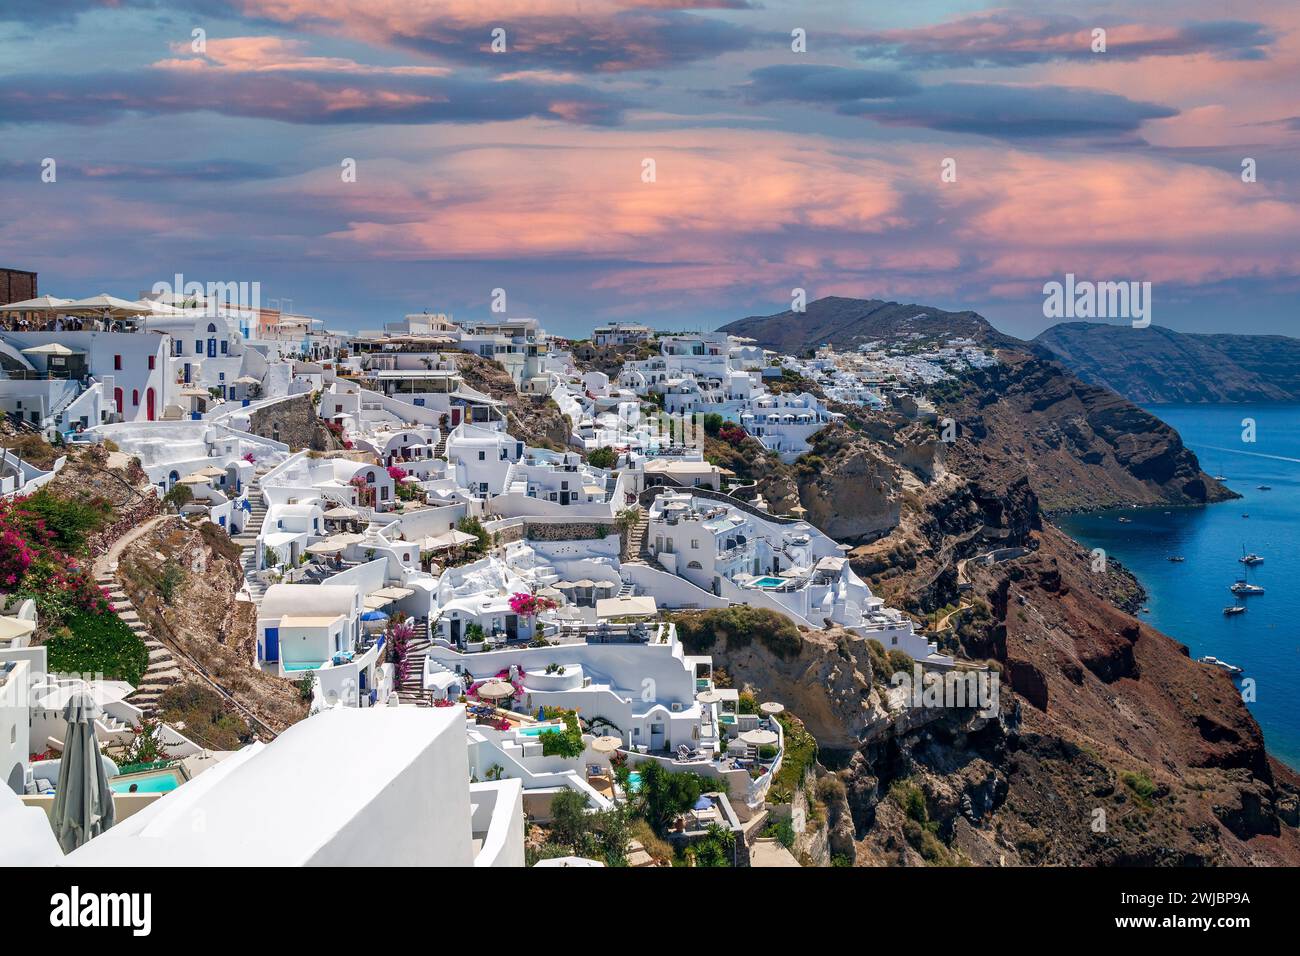 Typical white architecture with hotels and restaurants of Oia village on Santorini island, Greece. Stock Photo